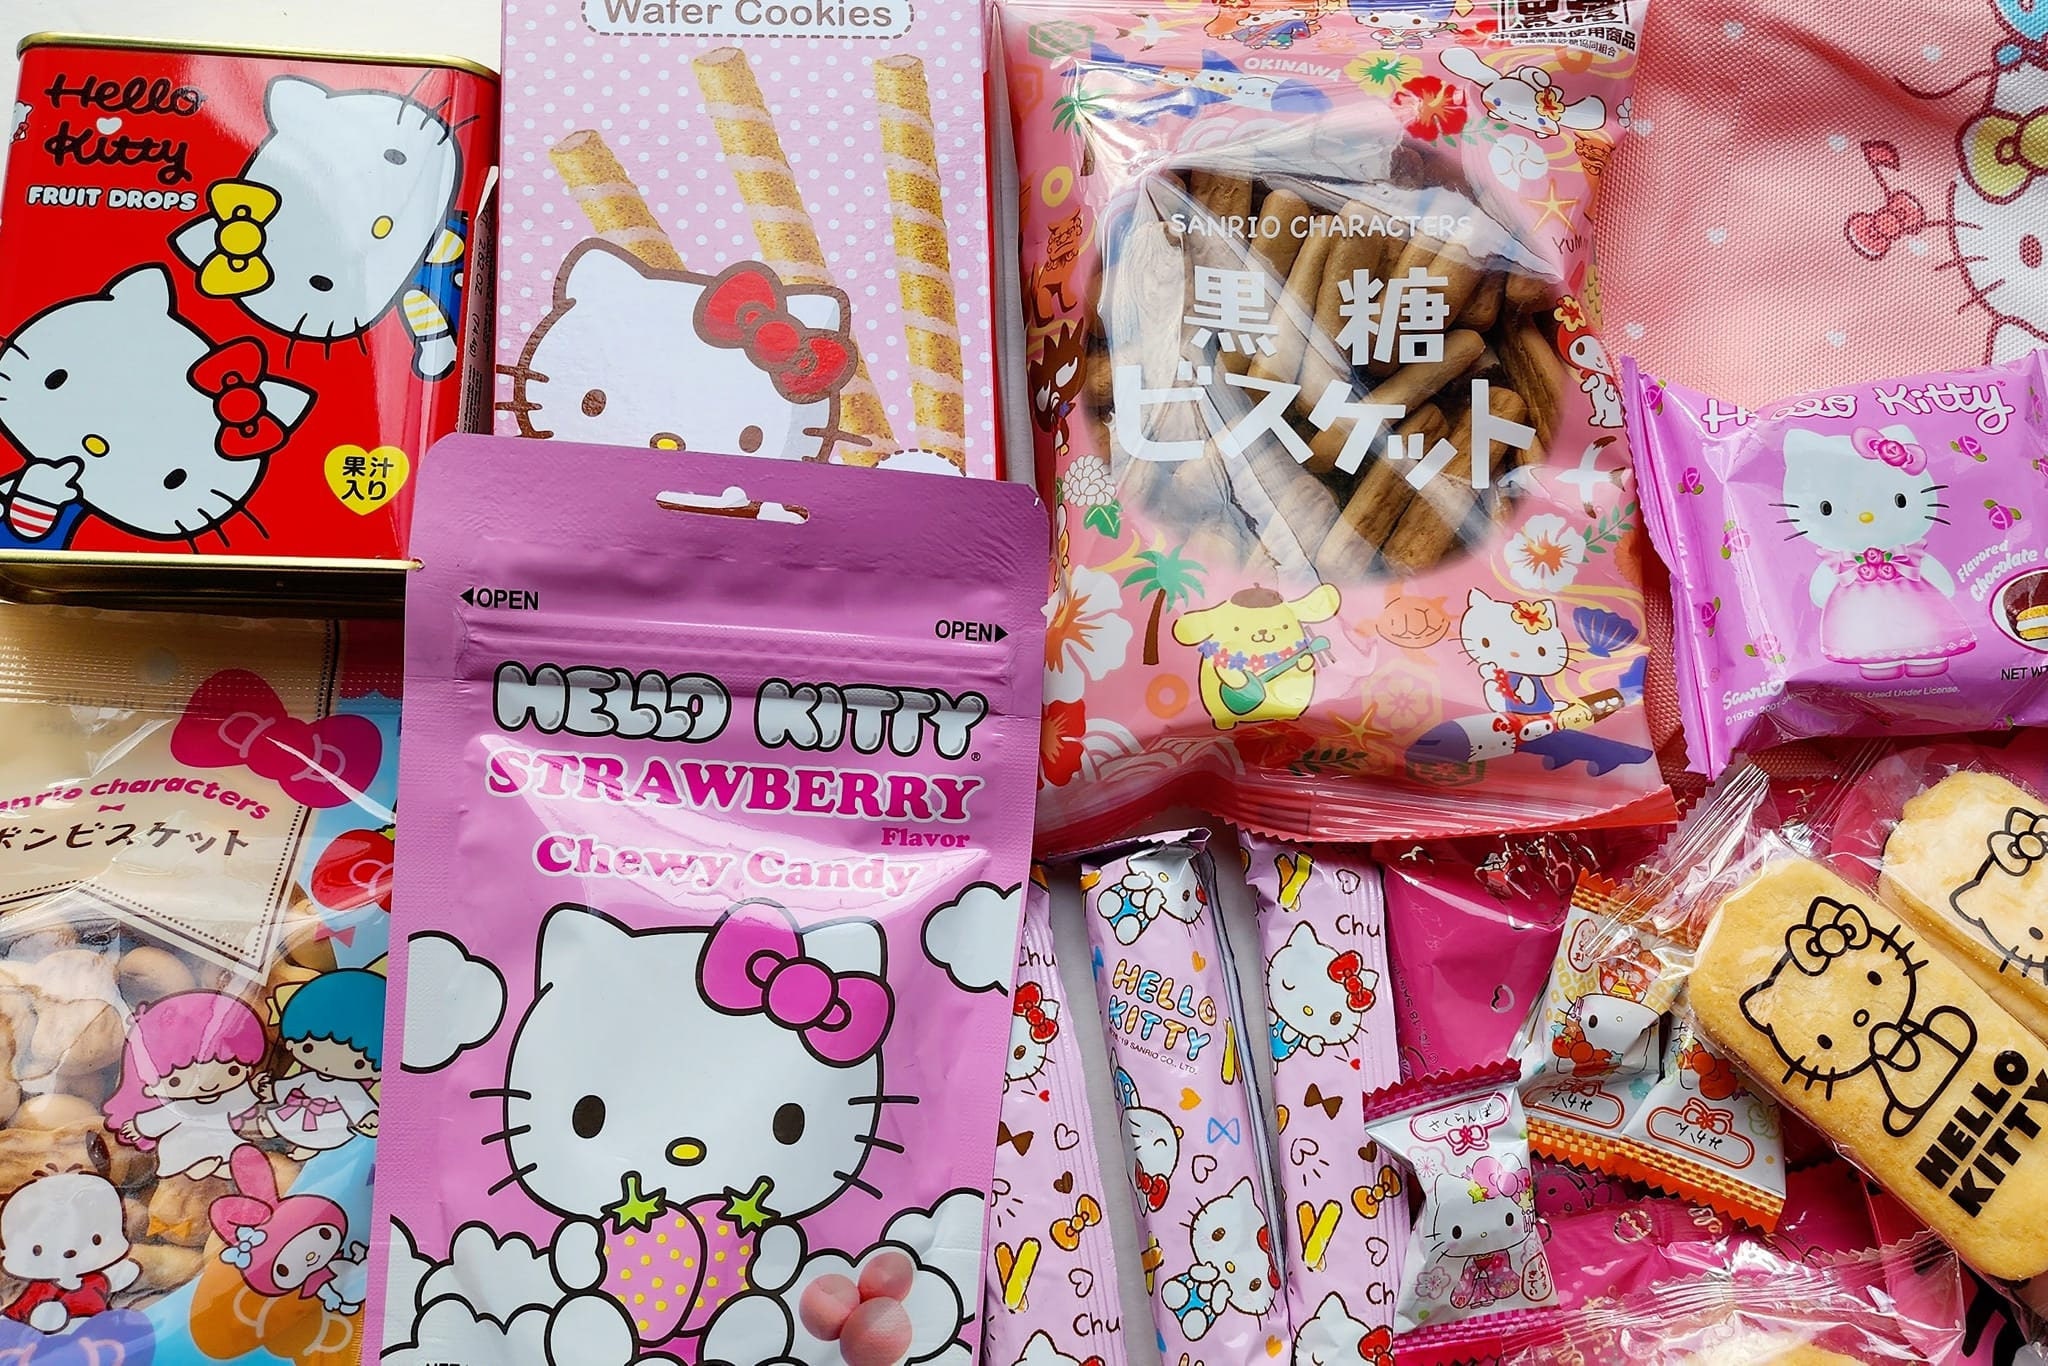 Living A Doll's Life : *REVIEW* Hello Sanrio Mystery Snack Box